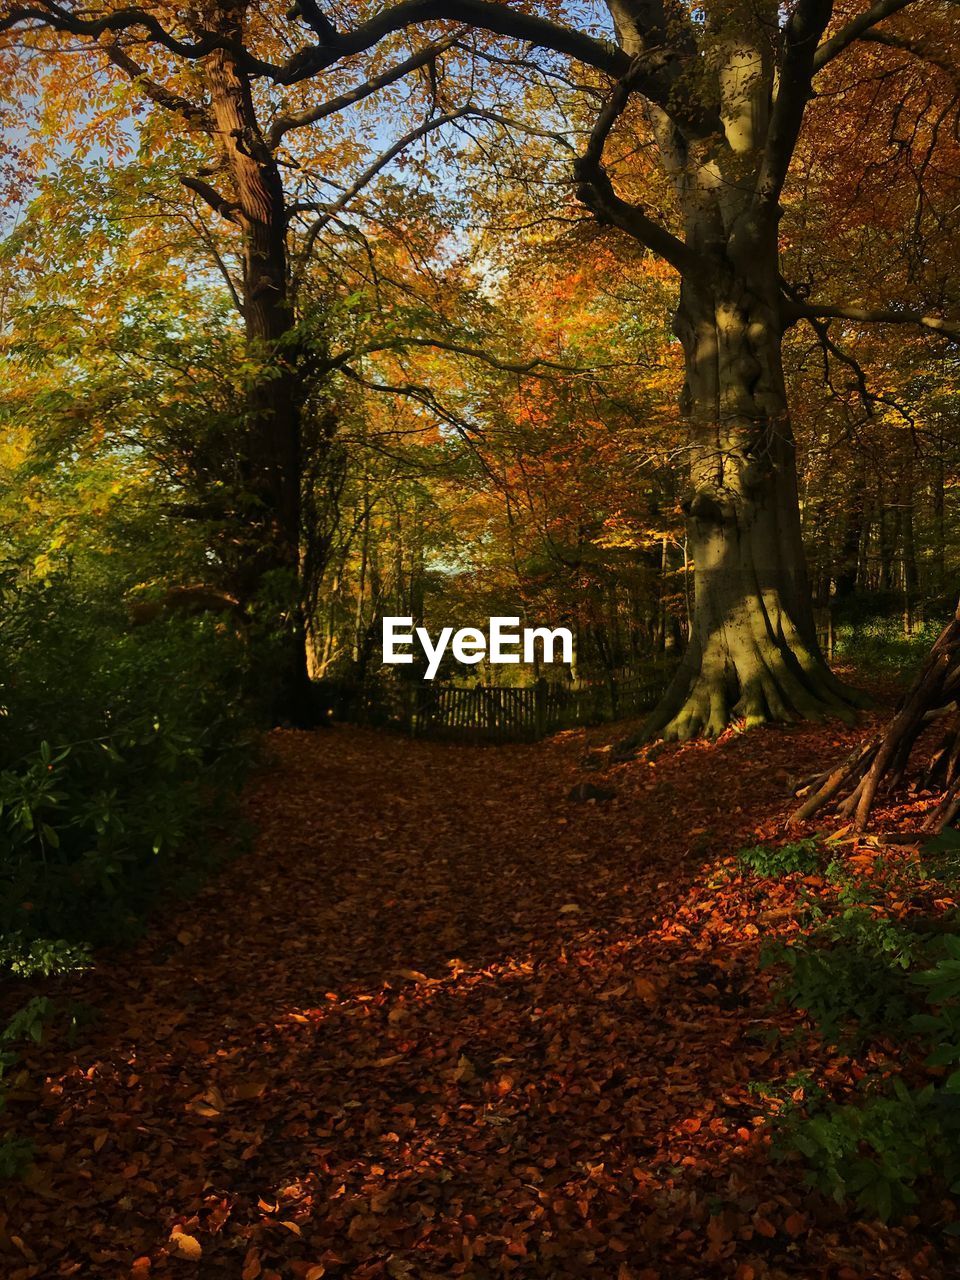 TREES AND LEAVES IN FOREST DURING AUTUMN